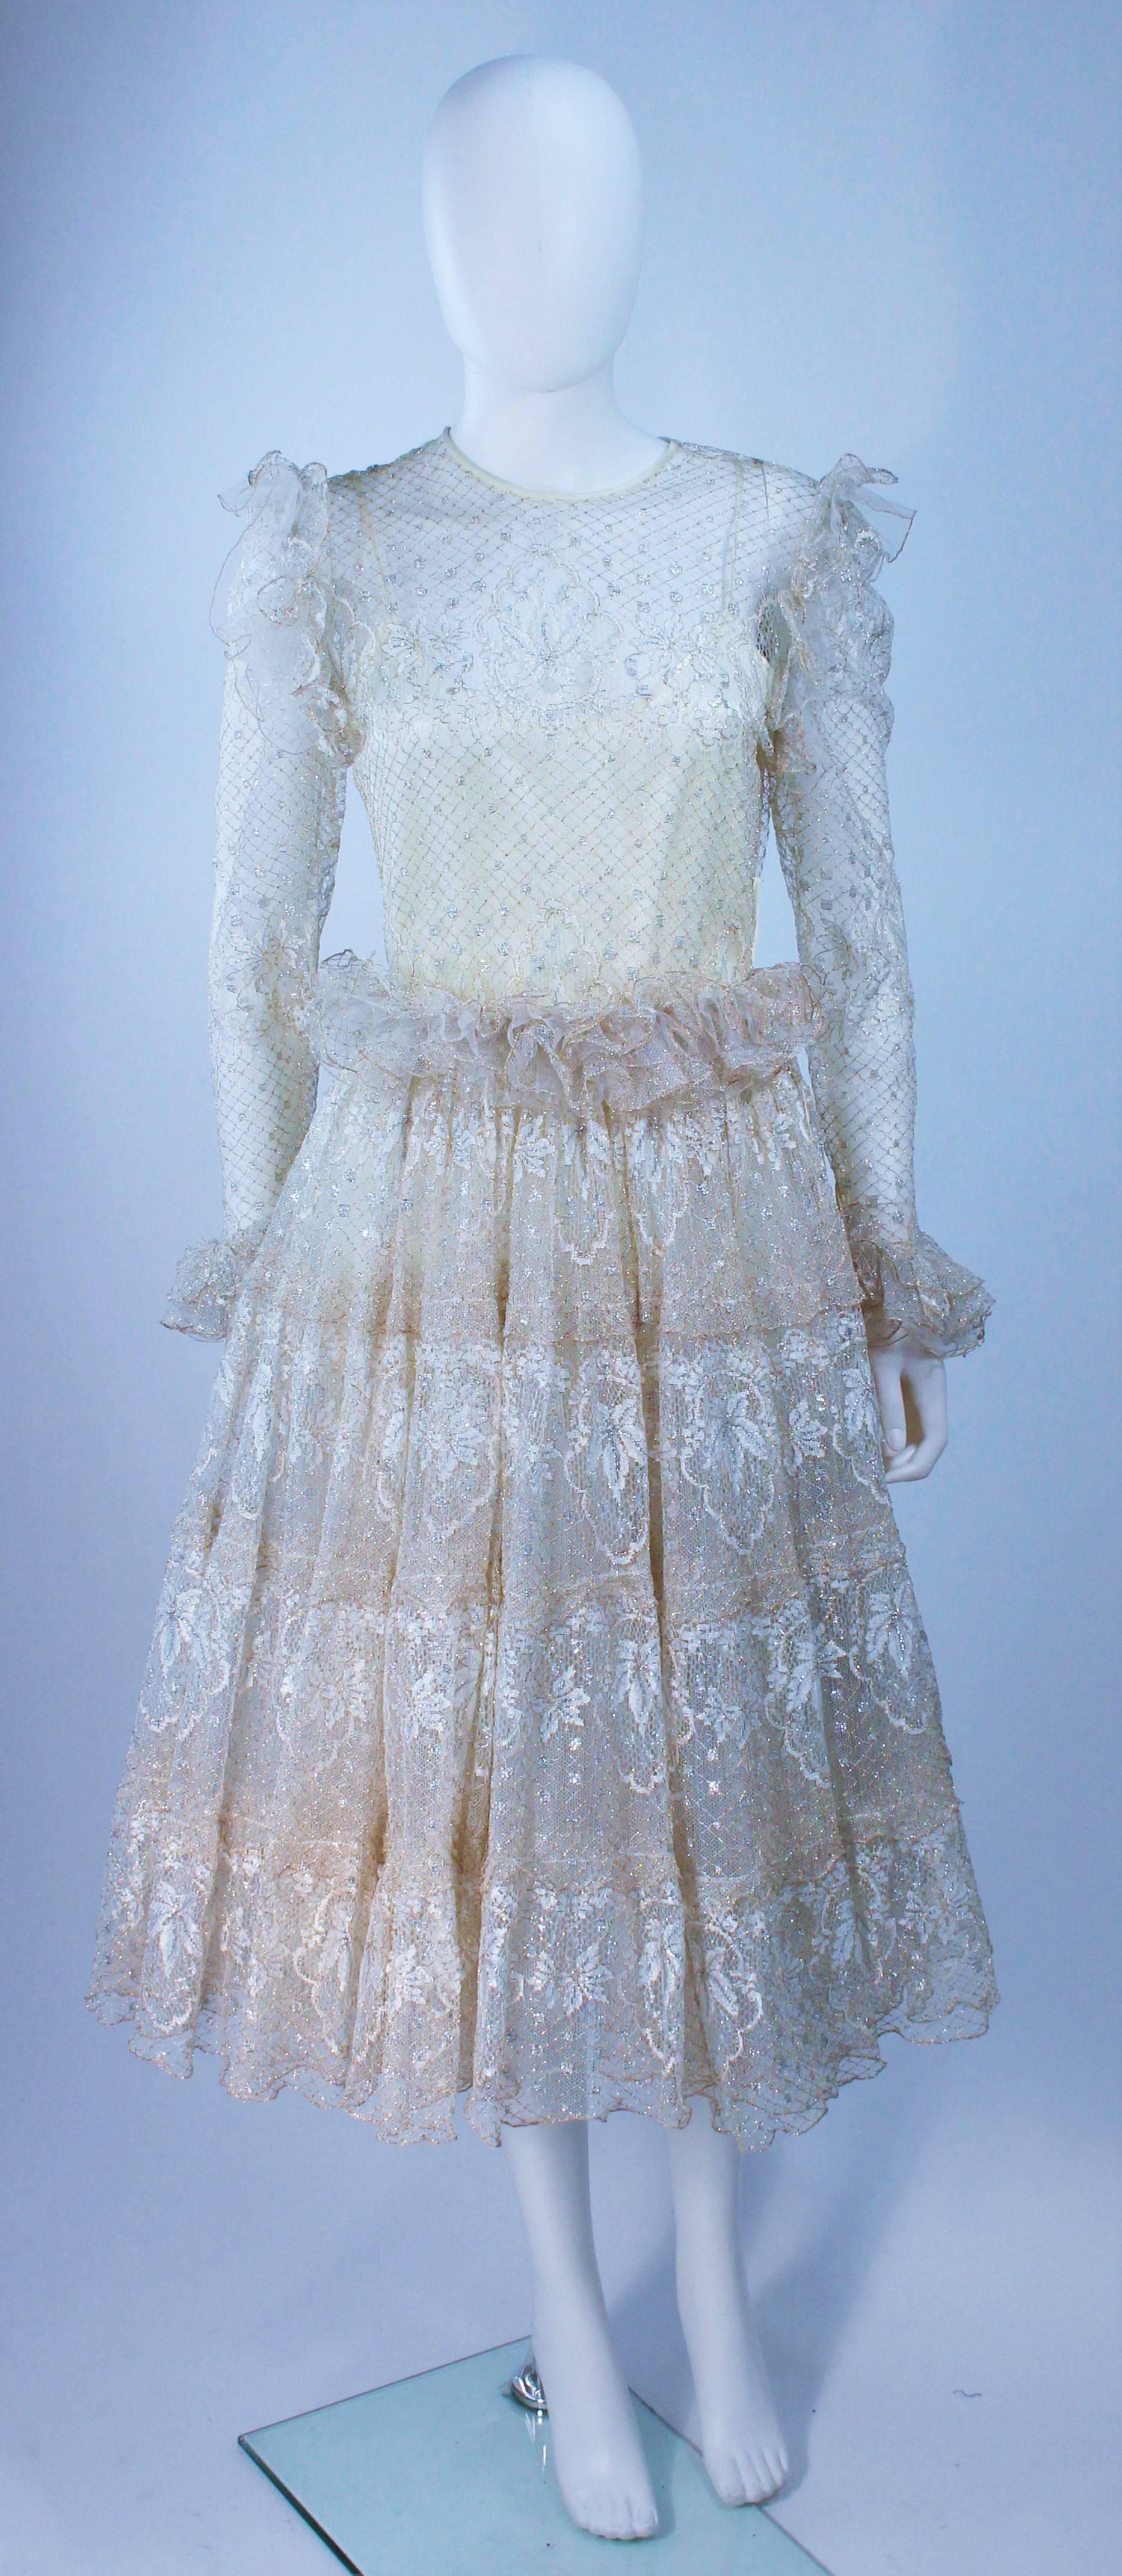  This Ted Lapidus dress is composed of a white and gold lace lame. Features a side button closure and slip with belt. In excellent vintage condition. 

**Please cross-reference measurements for personal accuracy. Size in description box is an